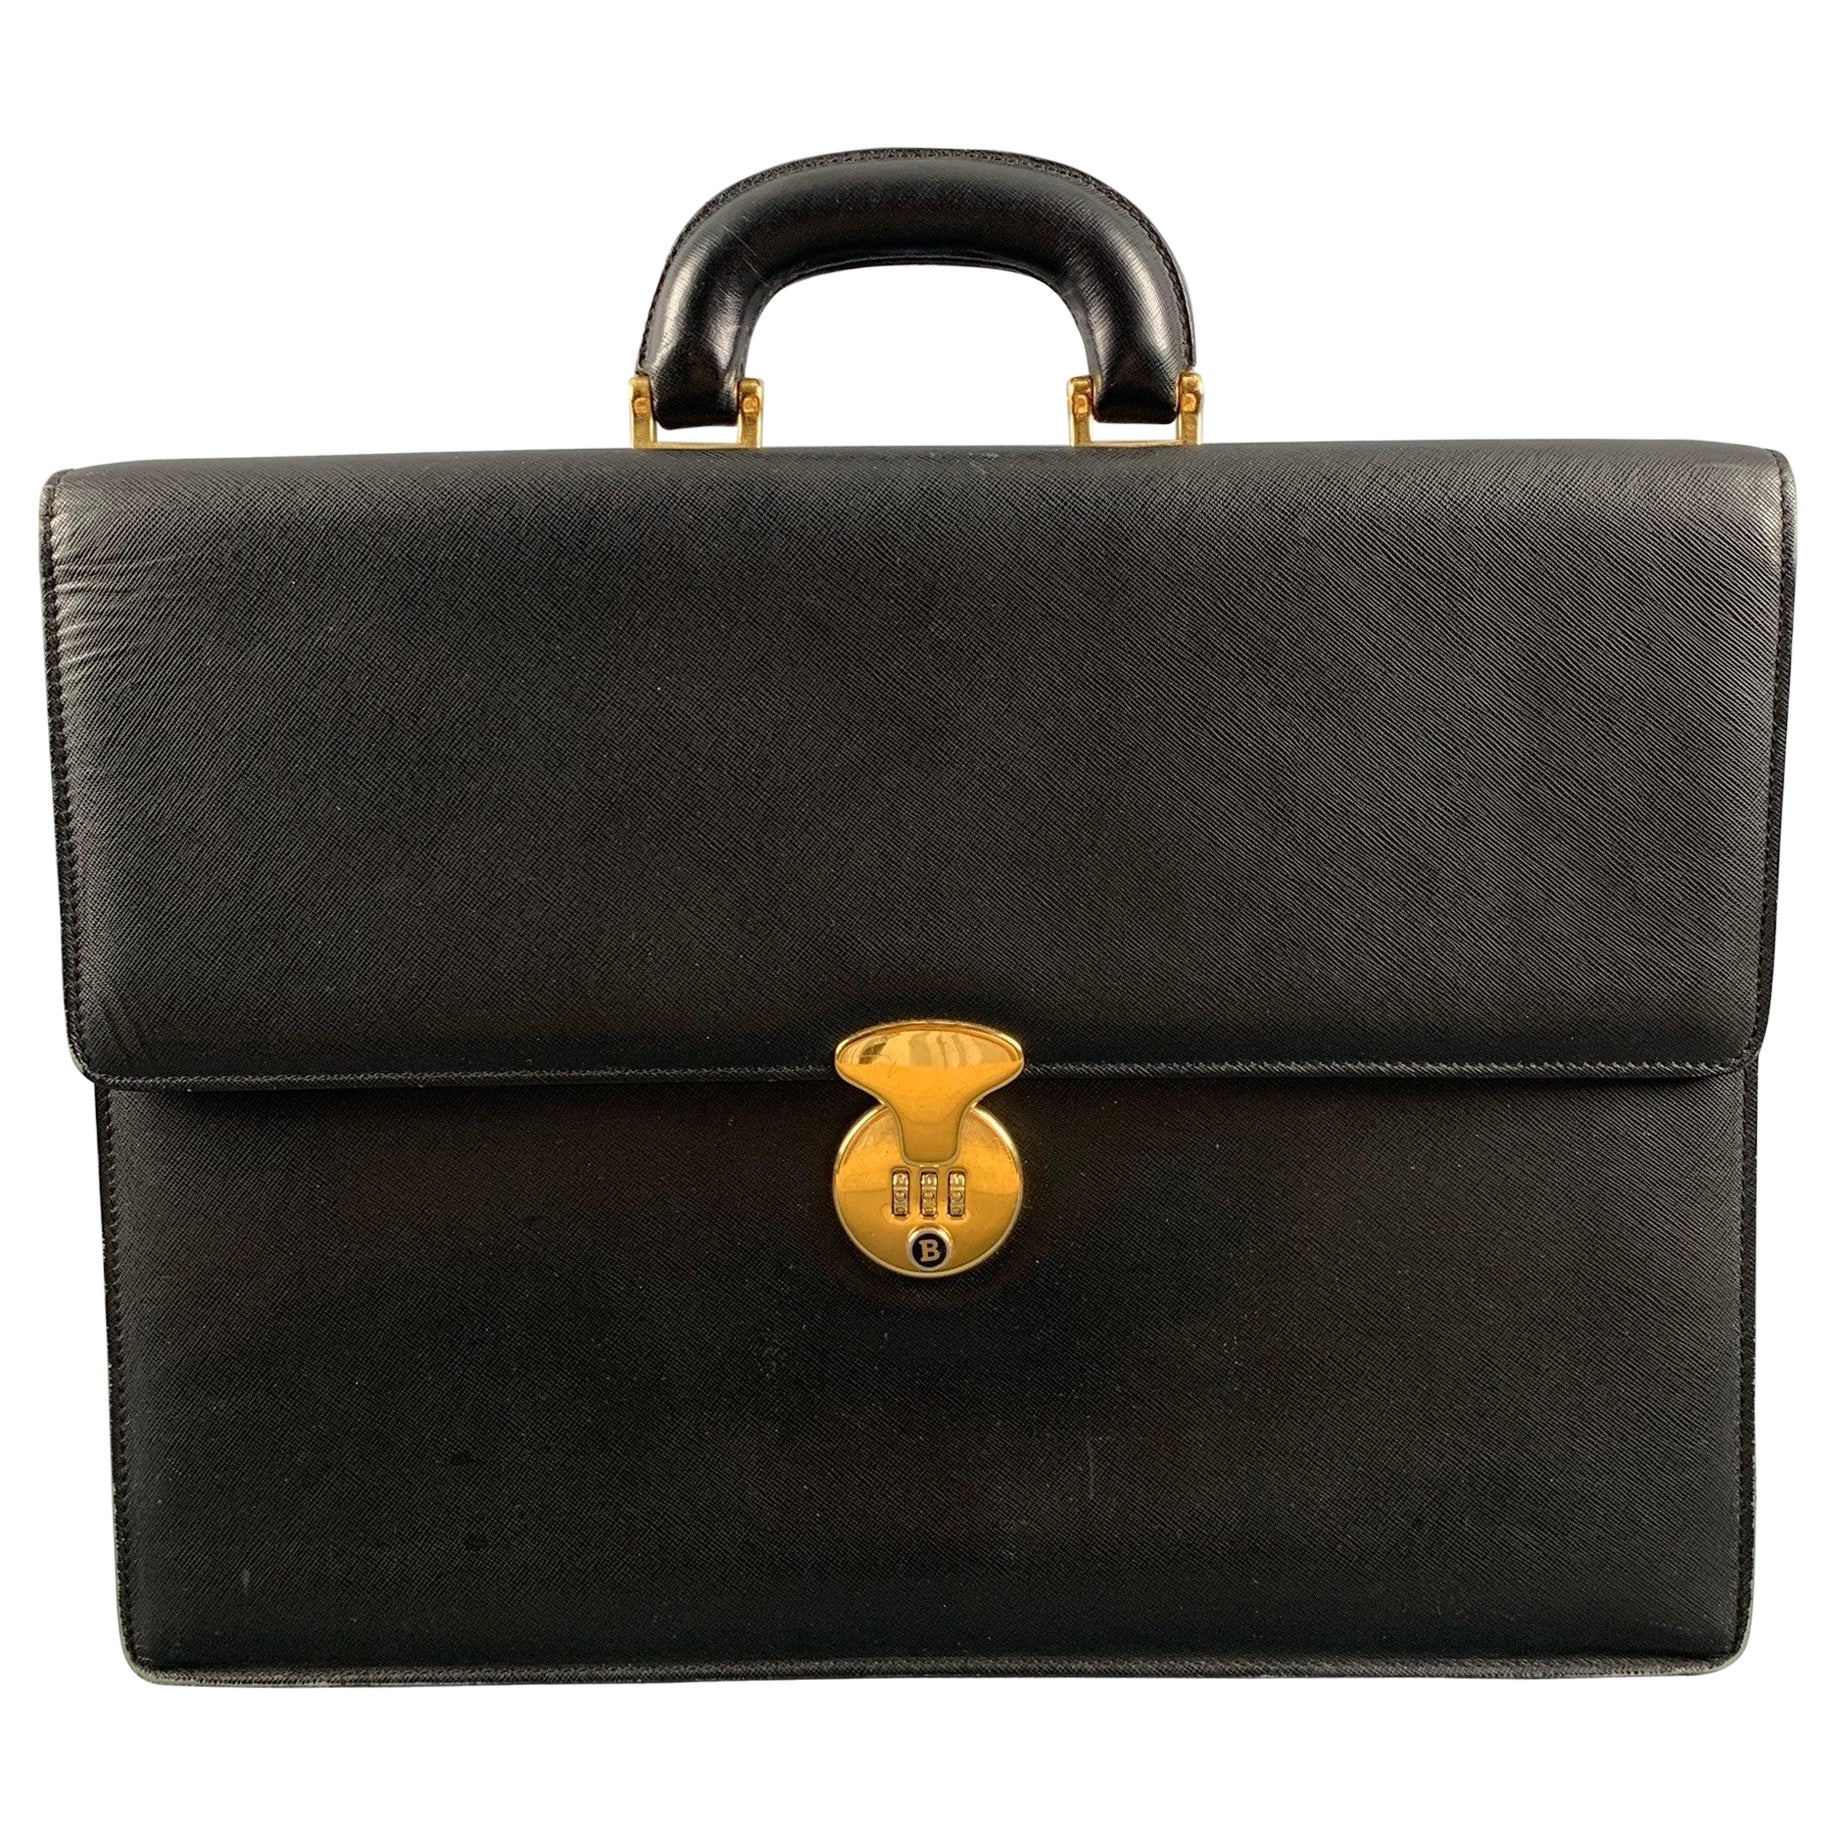 BALLY Black Leather Briefcase Bags For Sale